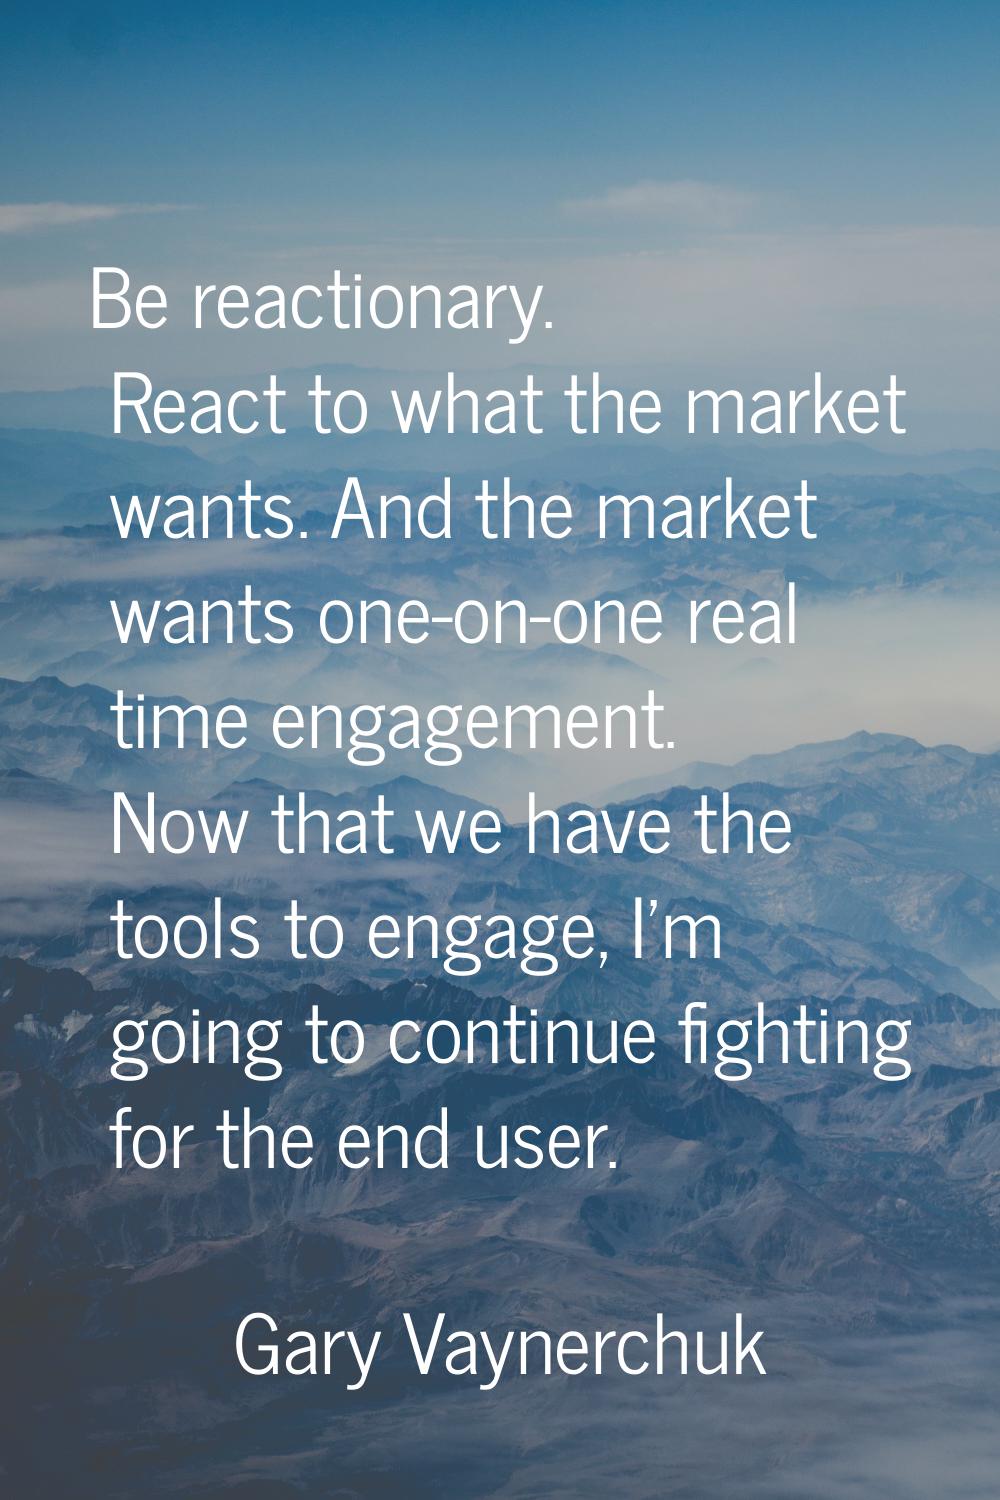 Be reactionary. React to what the market wants. And the market wants one-on-one real time engagemen